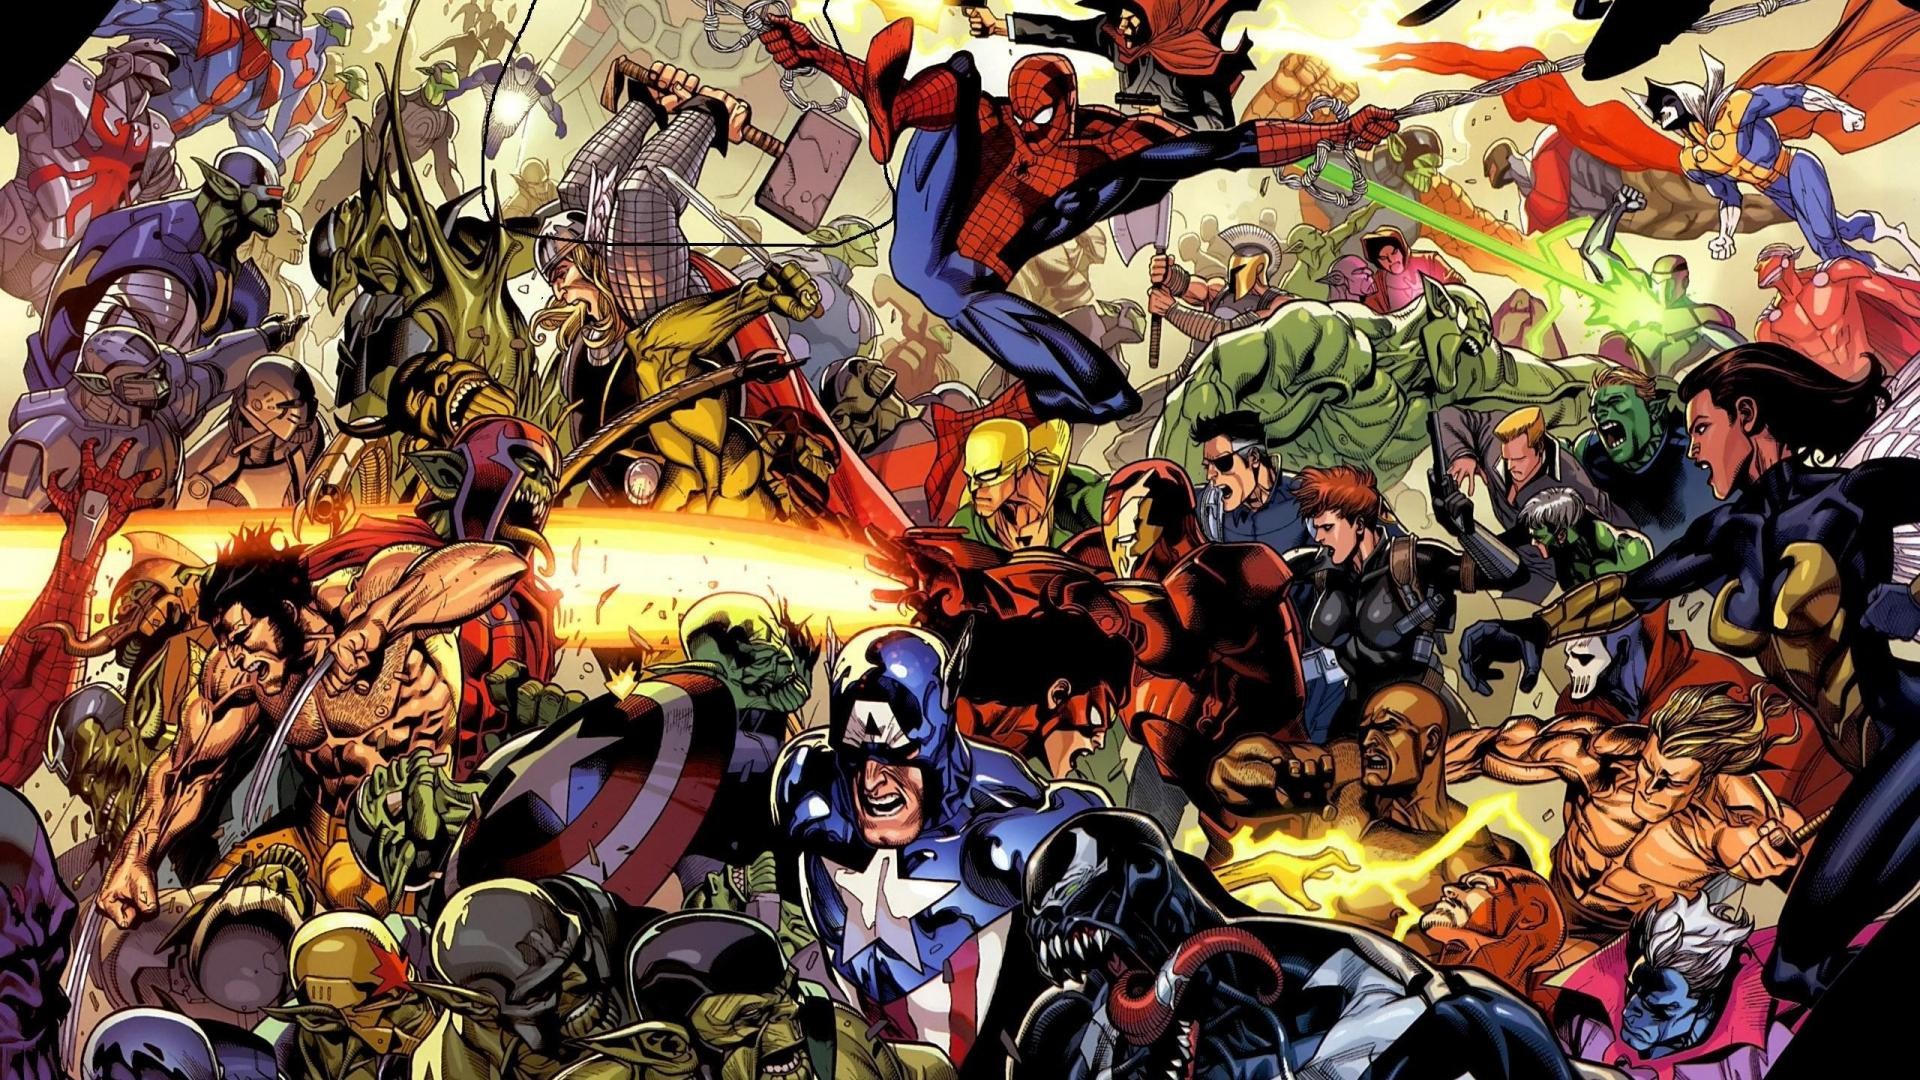 43+ Marvel wallpapers ·① Download free stunning full HD wallpapers for